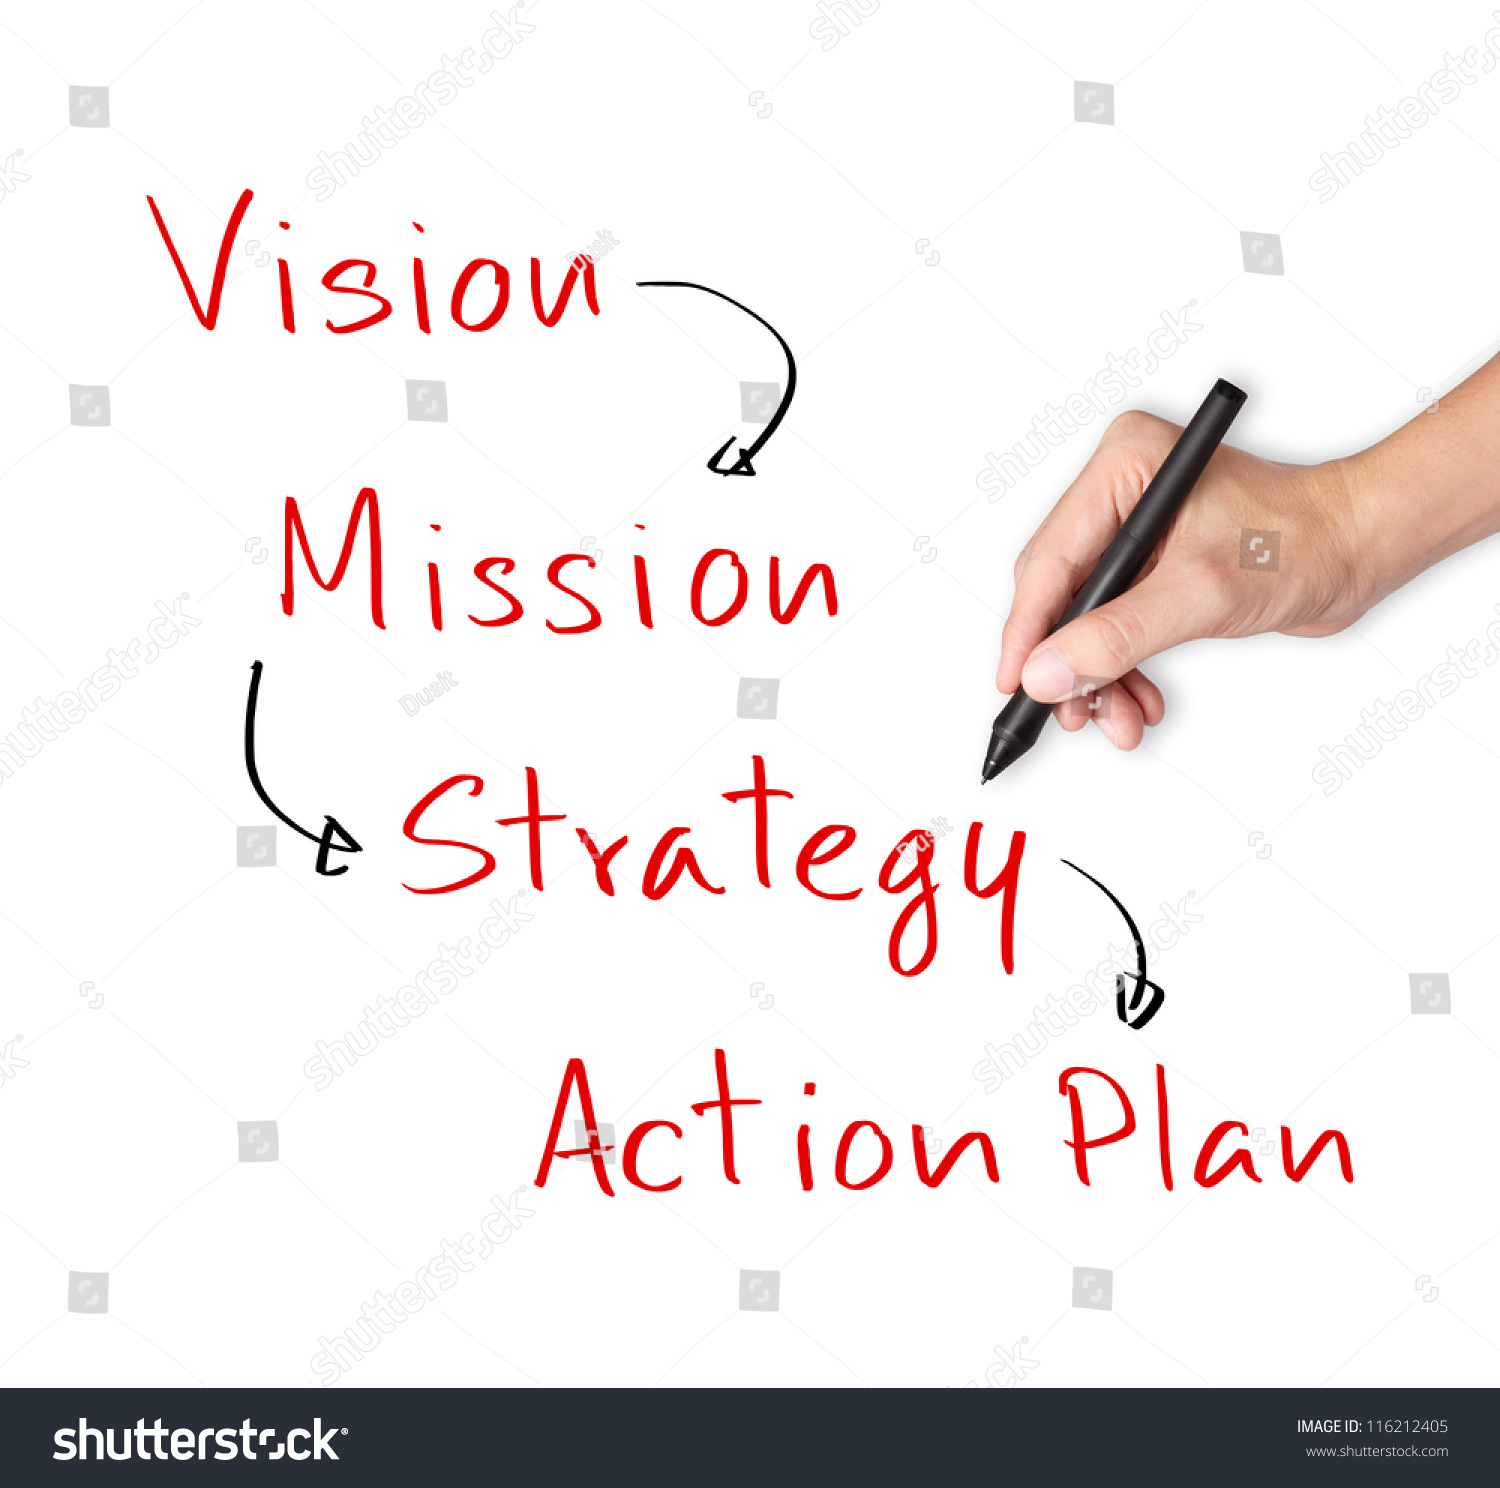 business vision clipart - photo #32